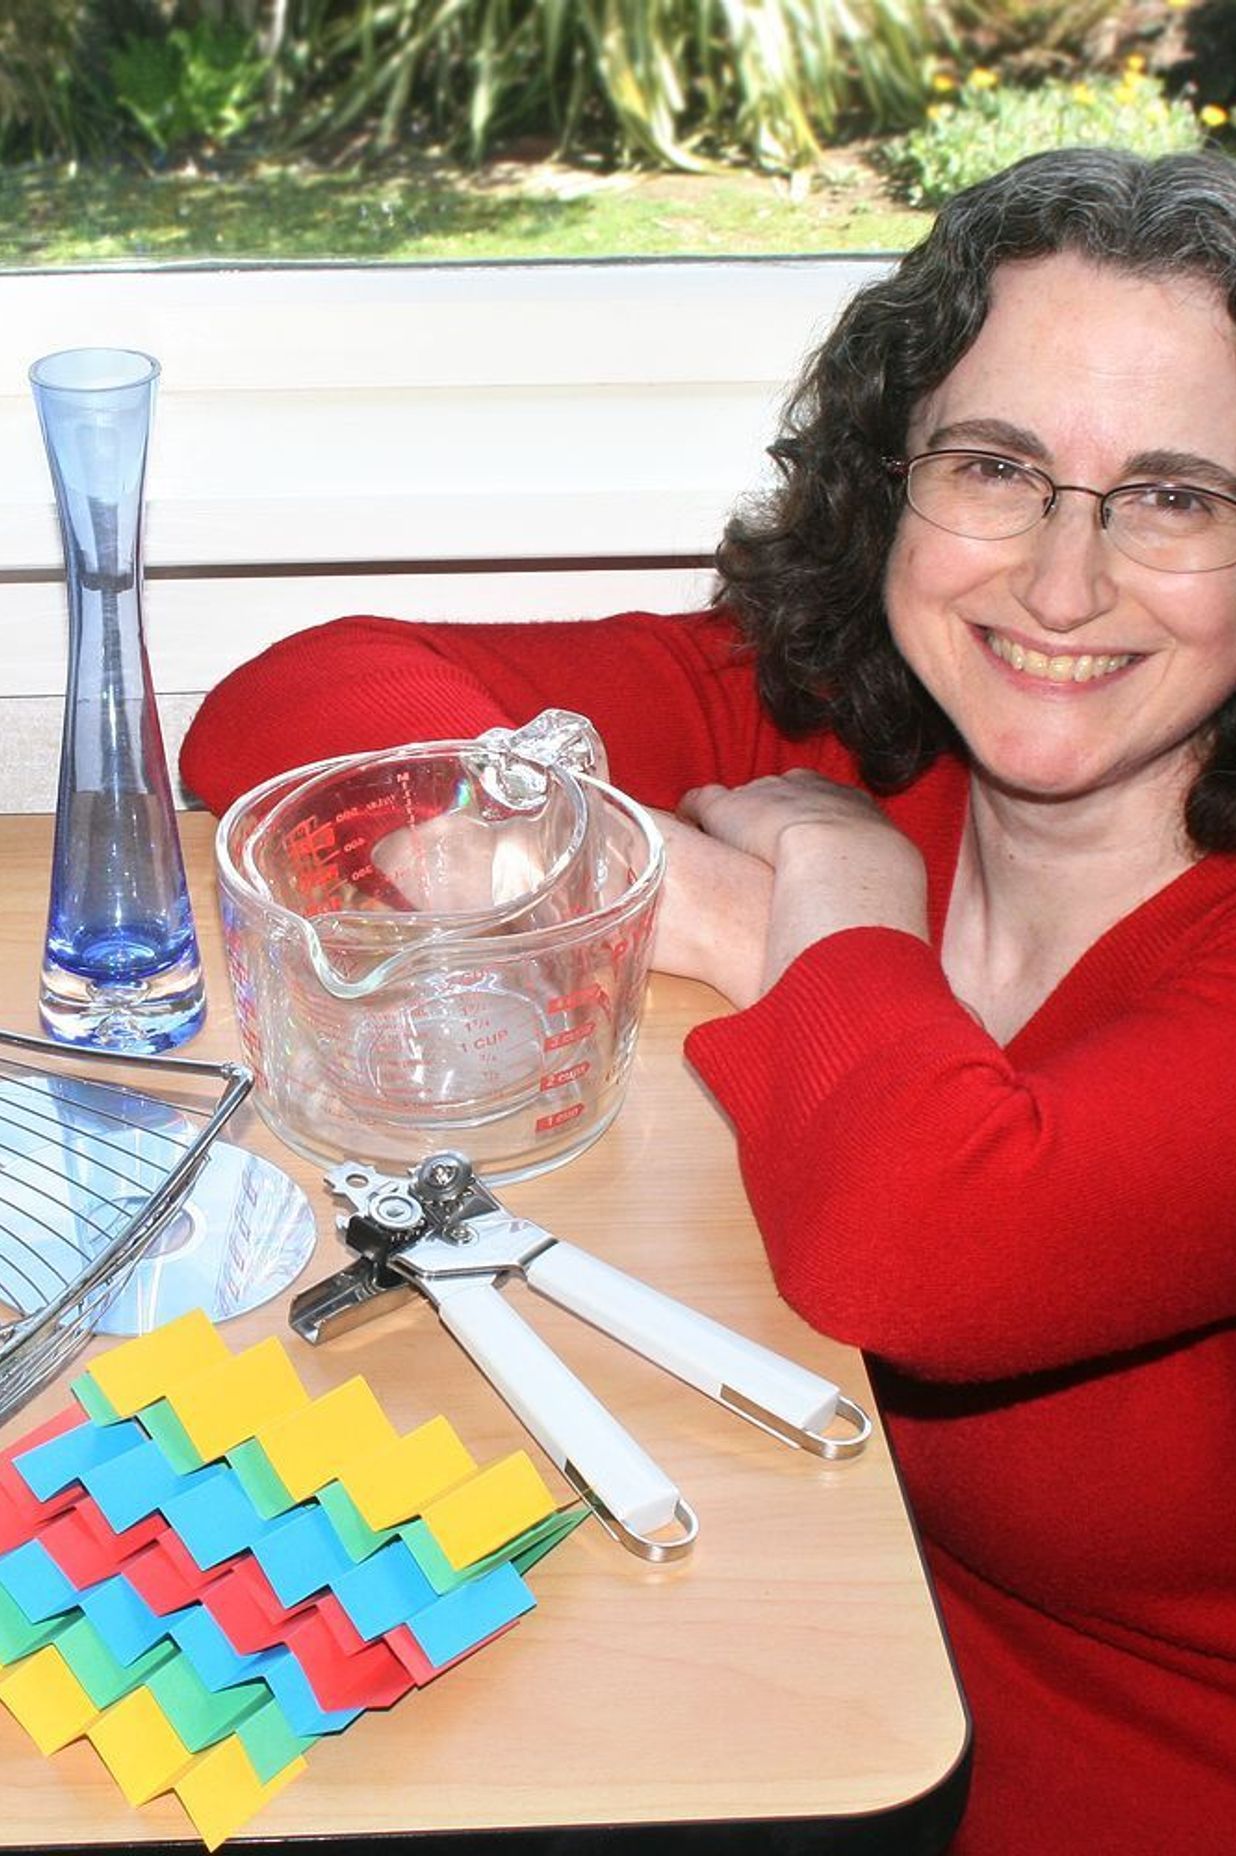  Jane with a selection of household items she’s used as subject matter for her photography